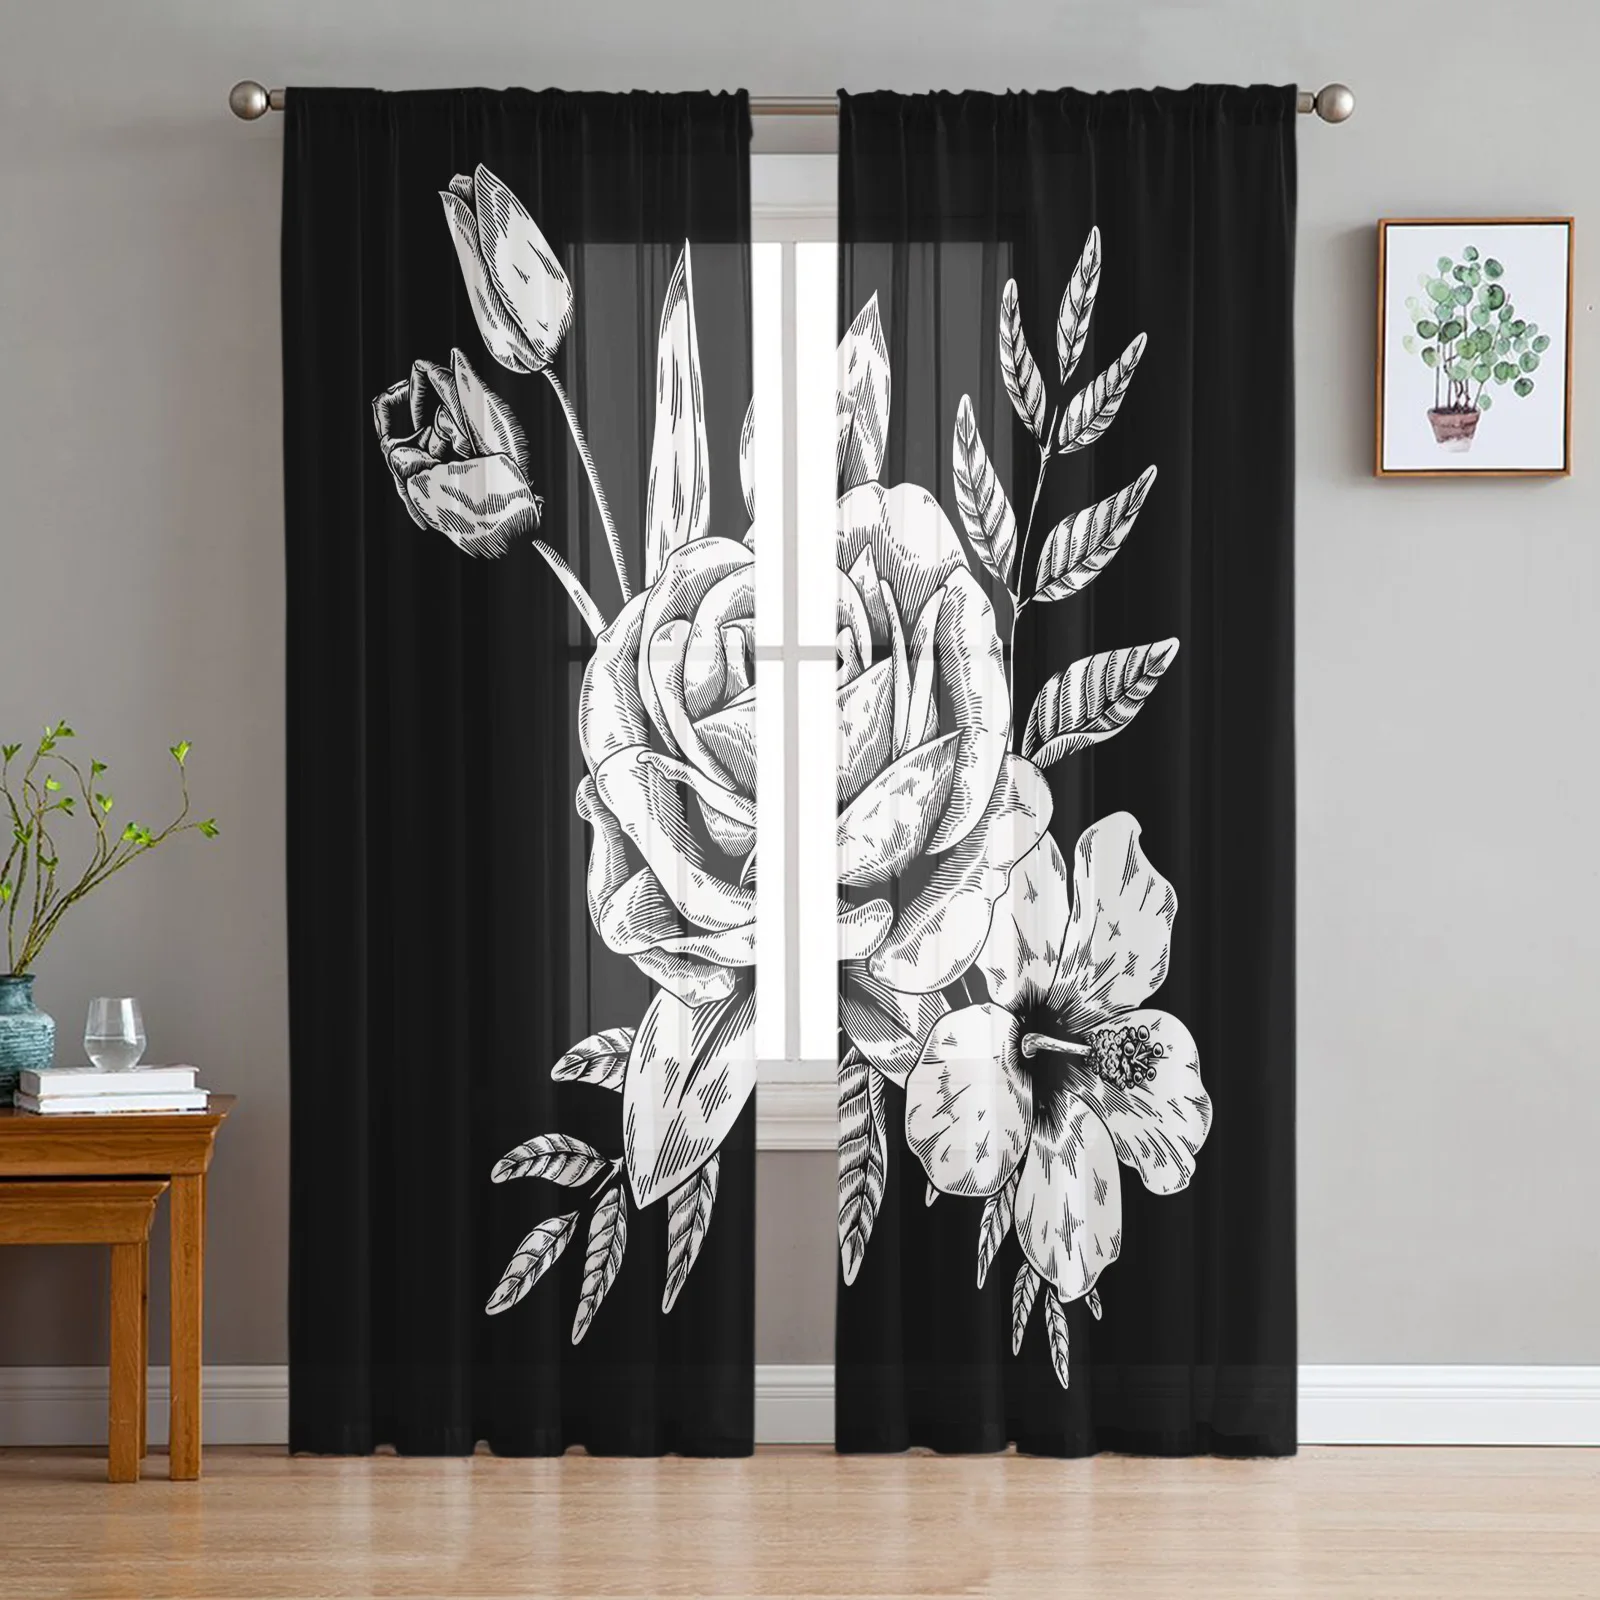 

Blooming Roses Sheer Curtain for Living Room Voile for Window Blinds Bedroom Tulle Drape Kitchen Cortinas Hall Curtains